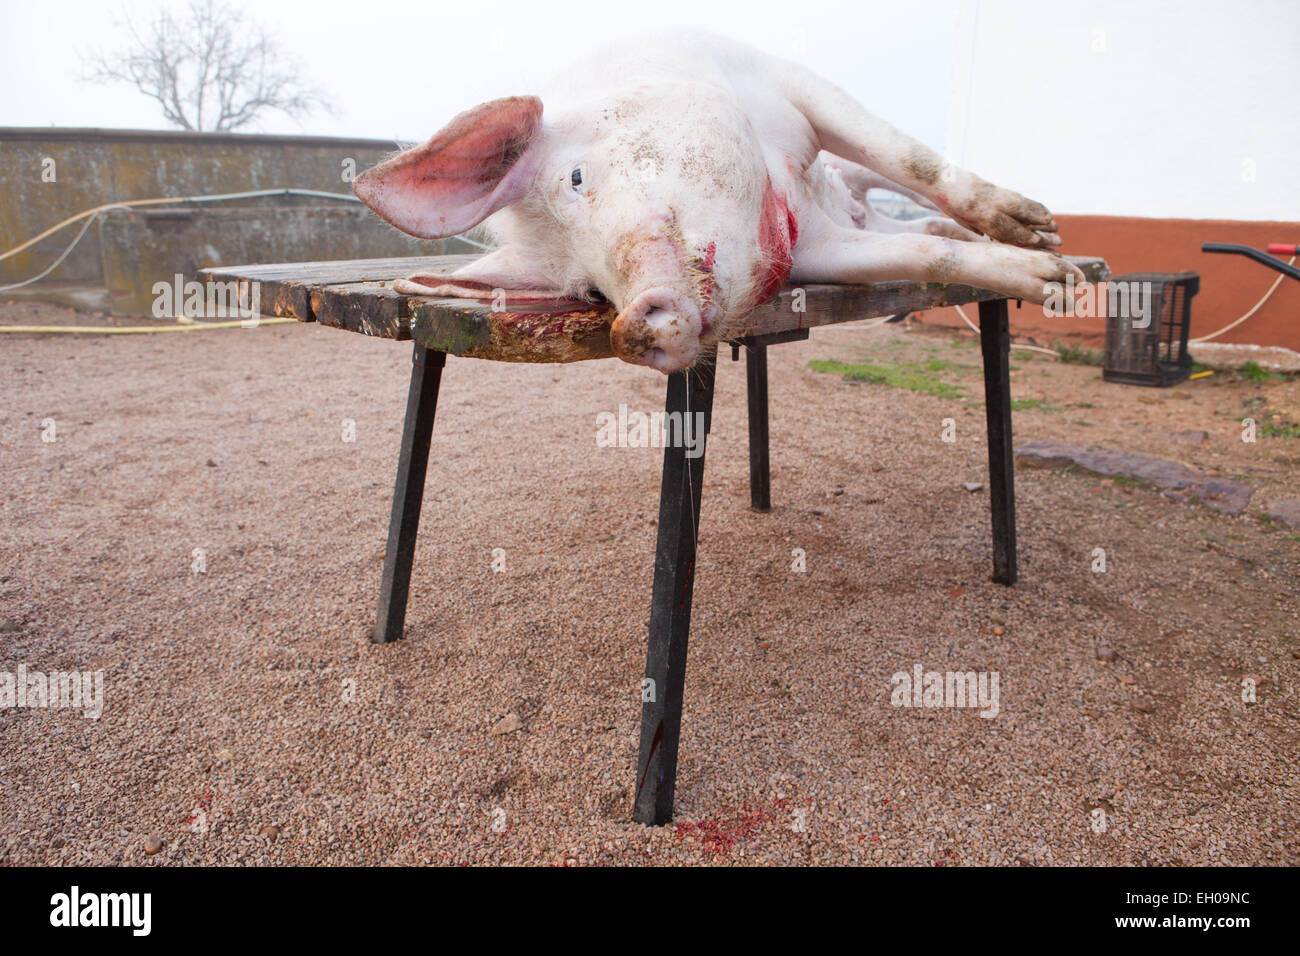 Traditional home slaughtering in a rural area. Dead pig over the butcher table just after killing Stock Photo